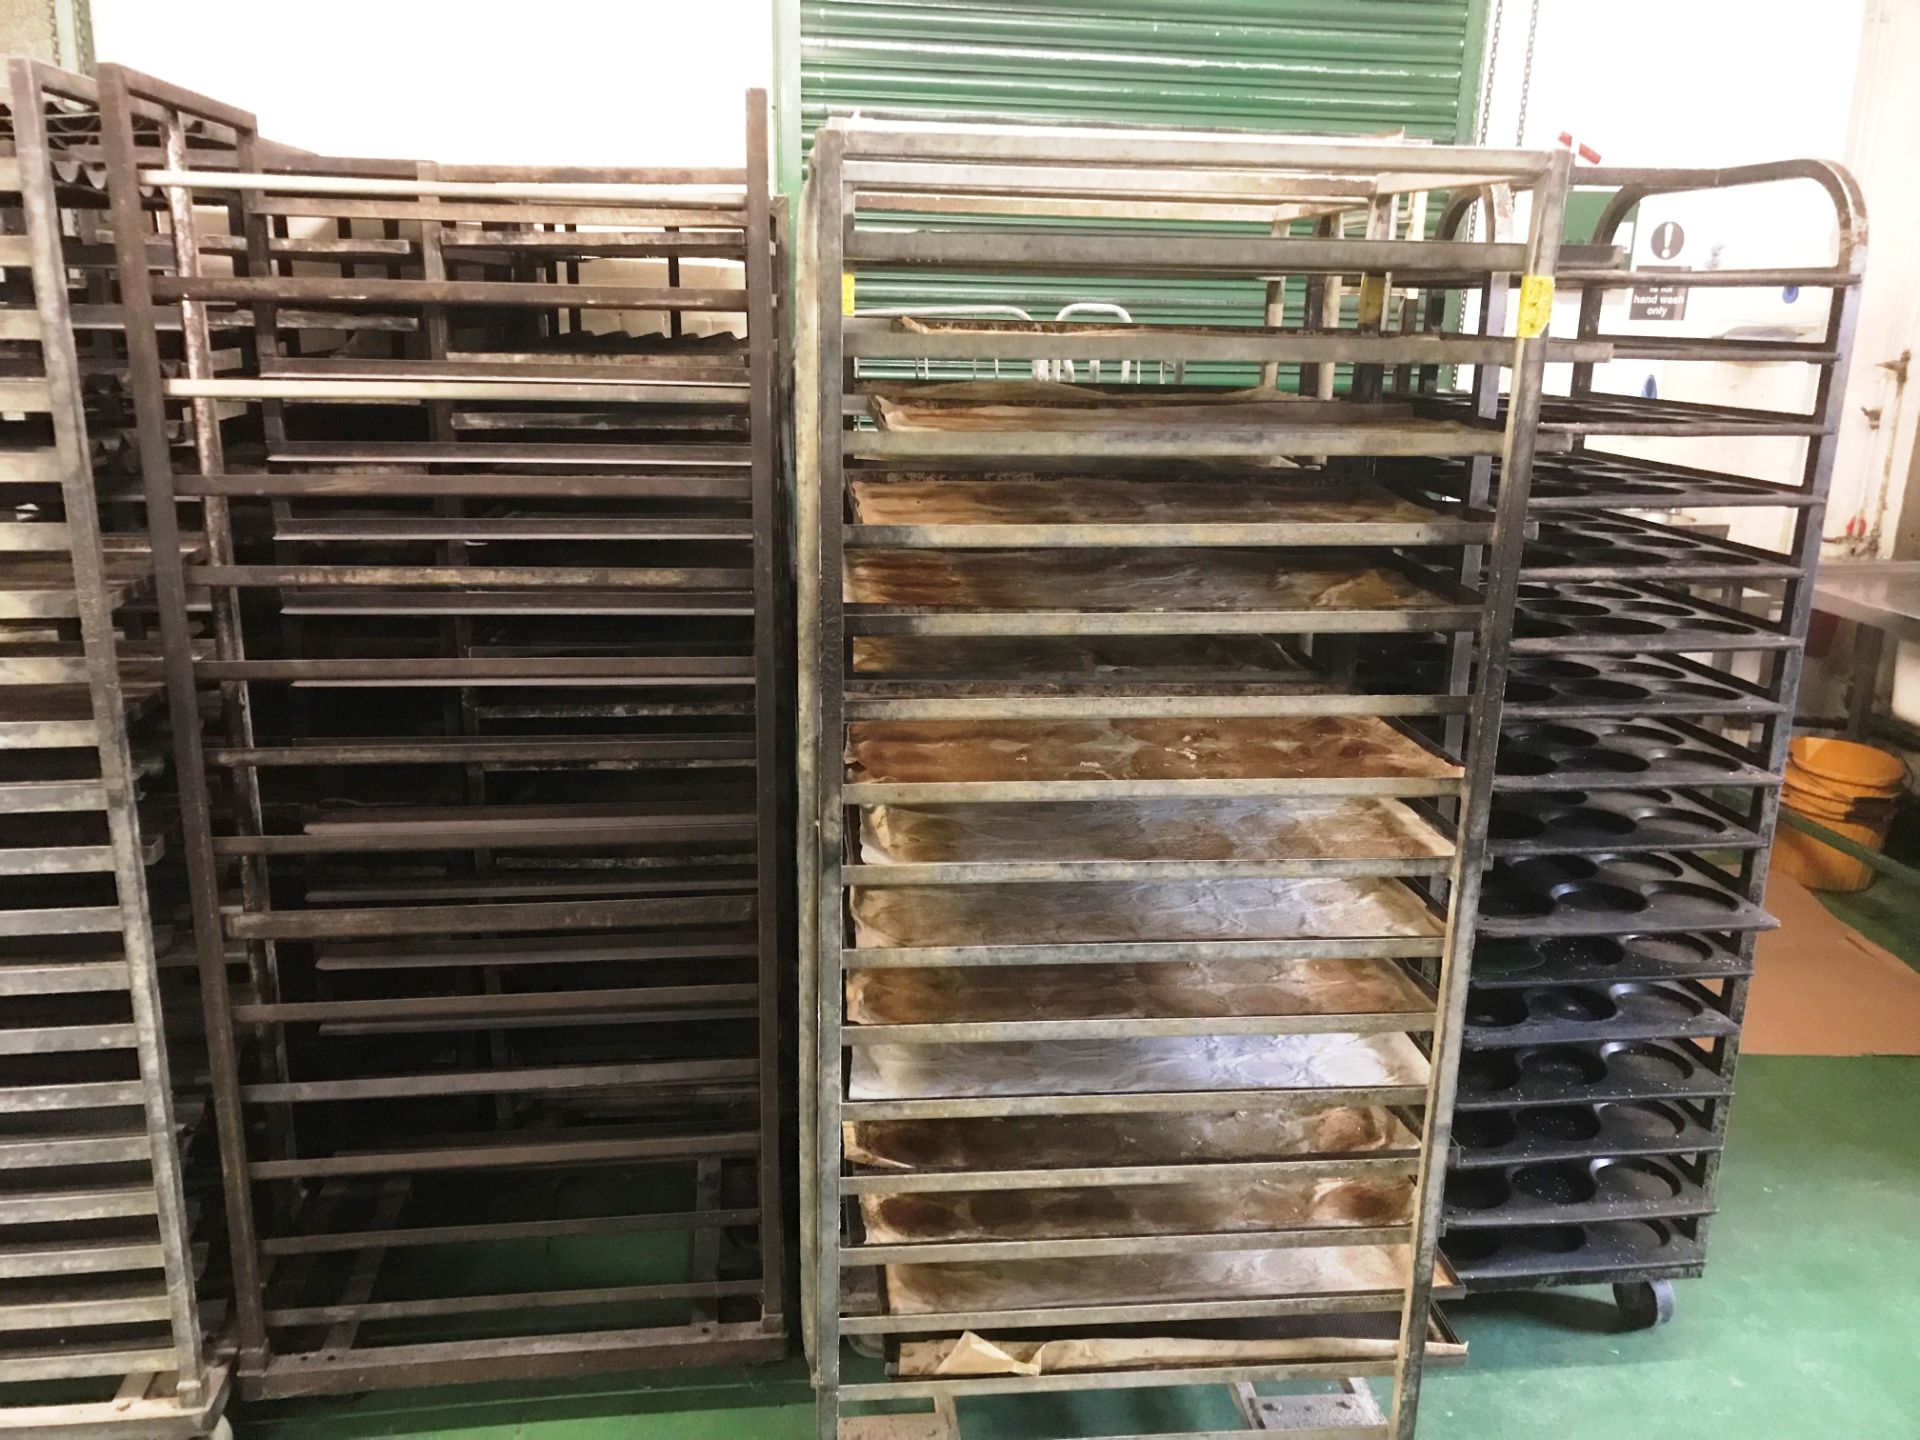 12 x Various Bakery Racks - As Pictured - Image 3 of 3